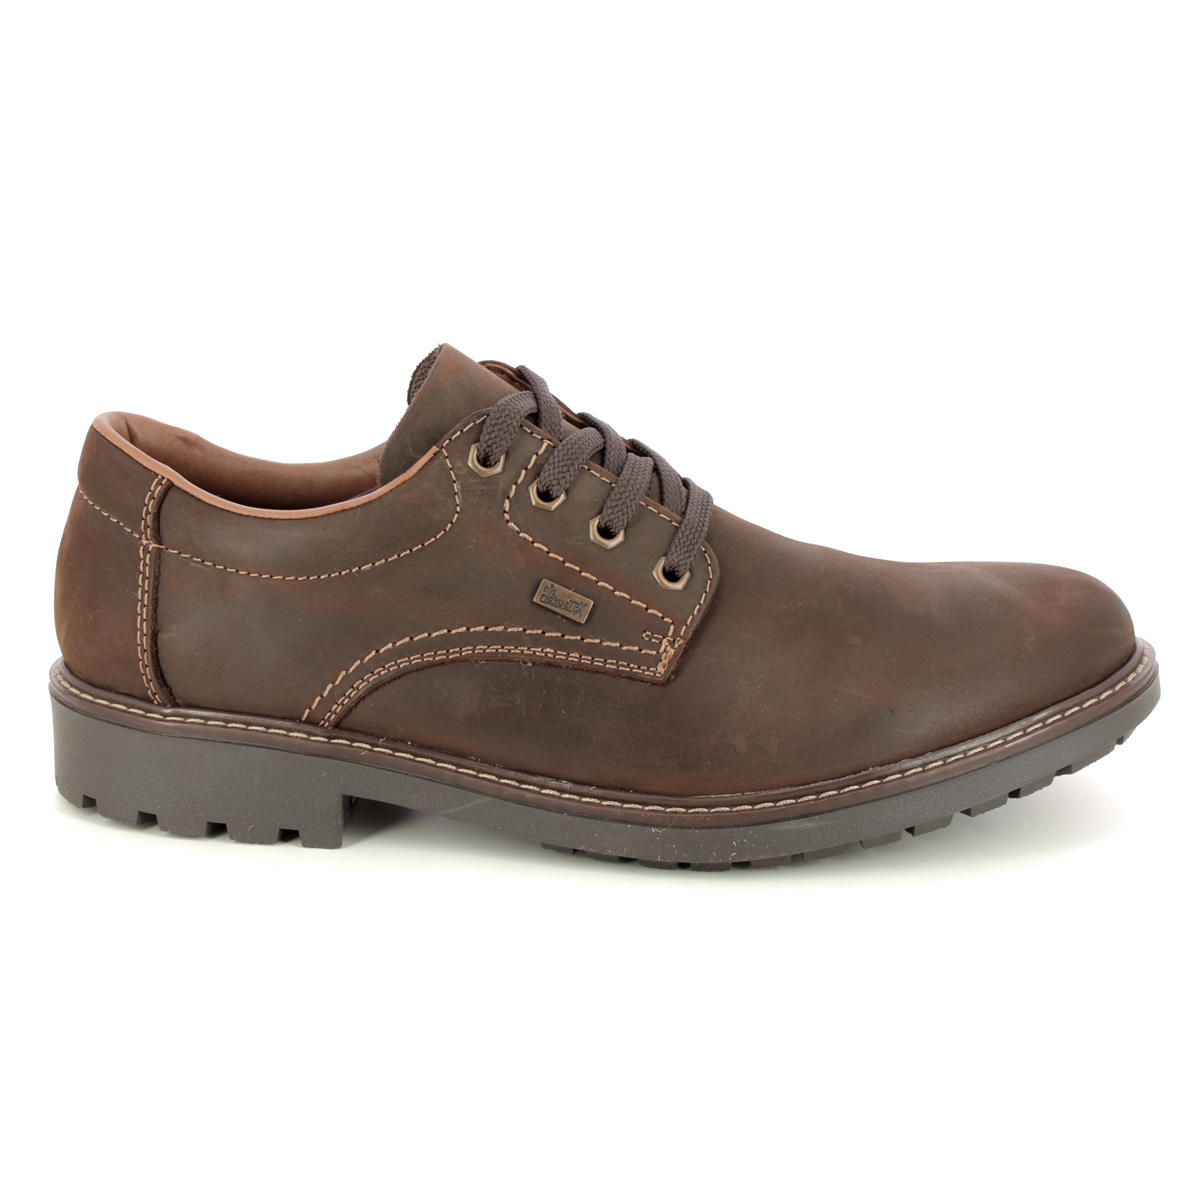 Rieker B4610-22 Brown waxy leather Mens comfort shoes